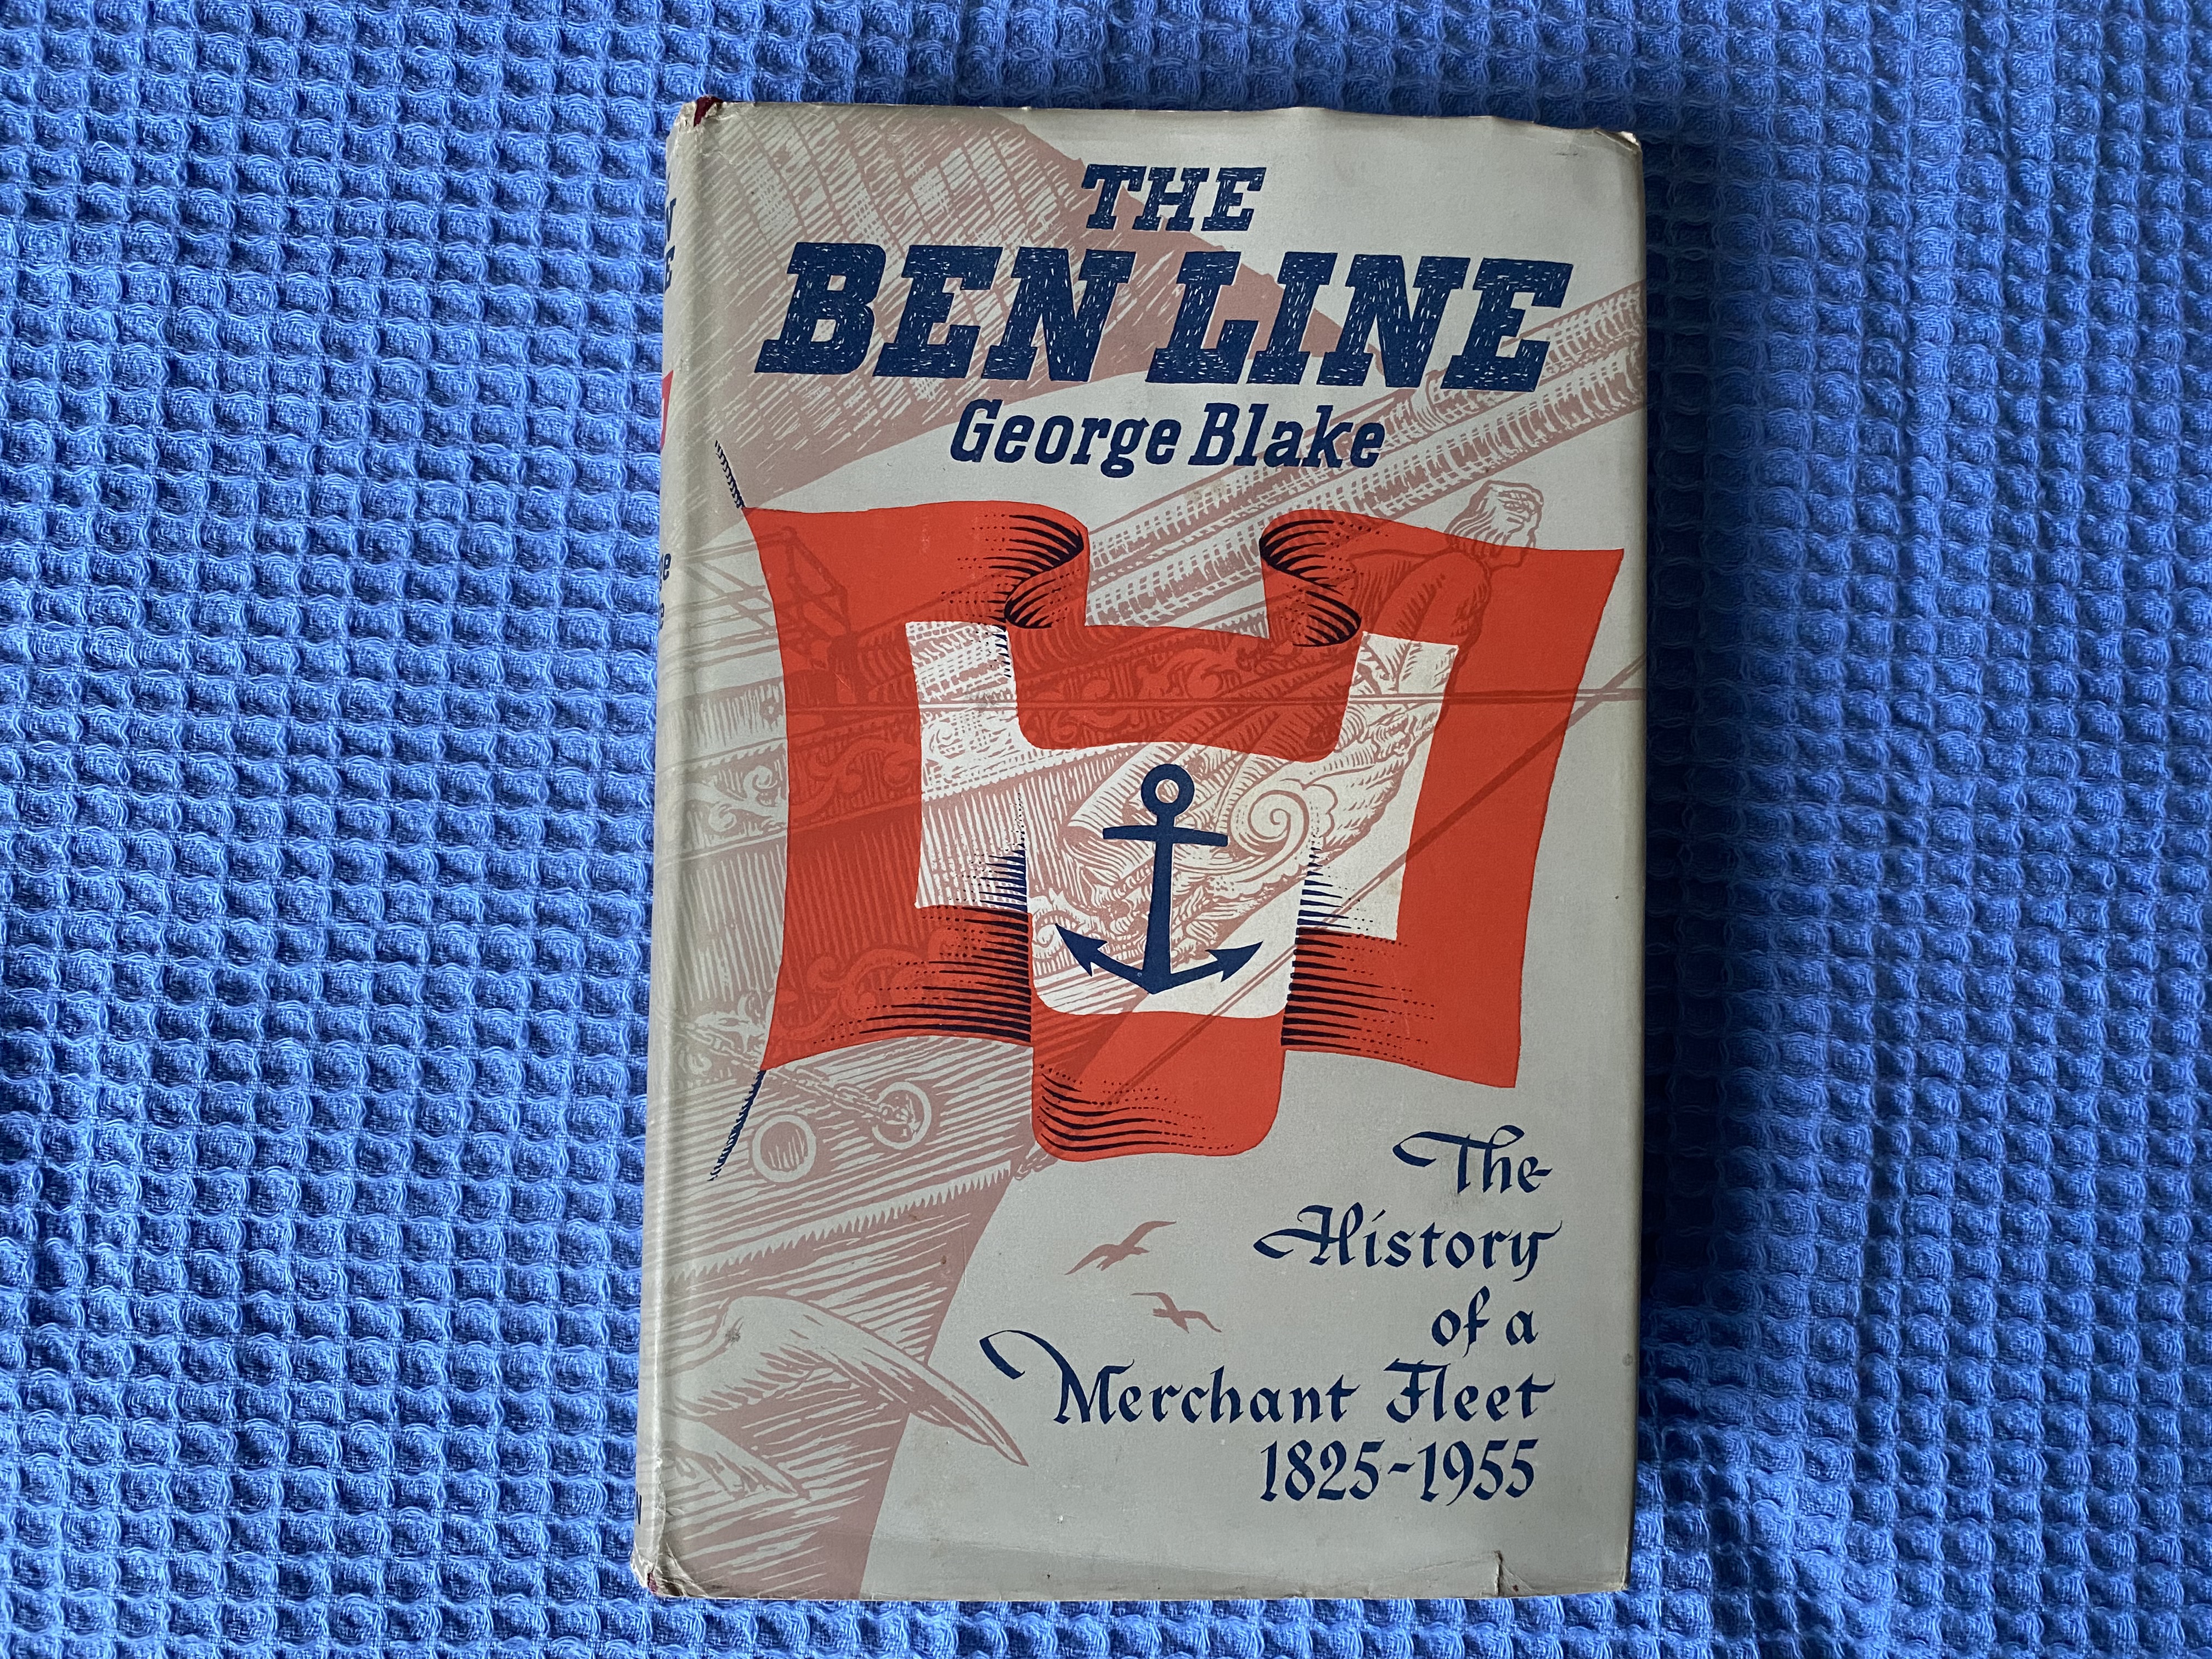 BOOK BY GEORGE BLAKE ENTITLED THE BEN LINE 1825 - 1955